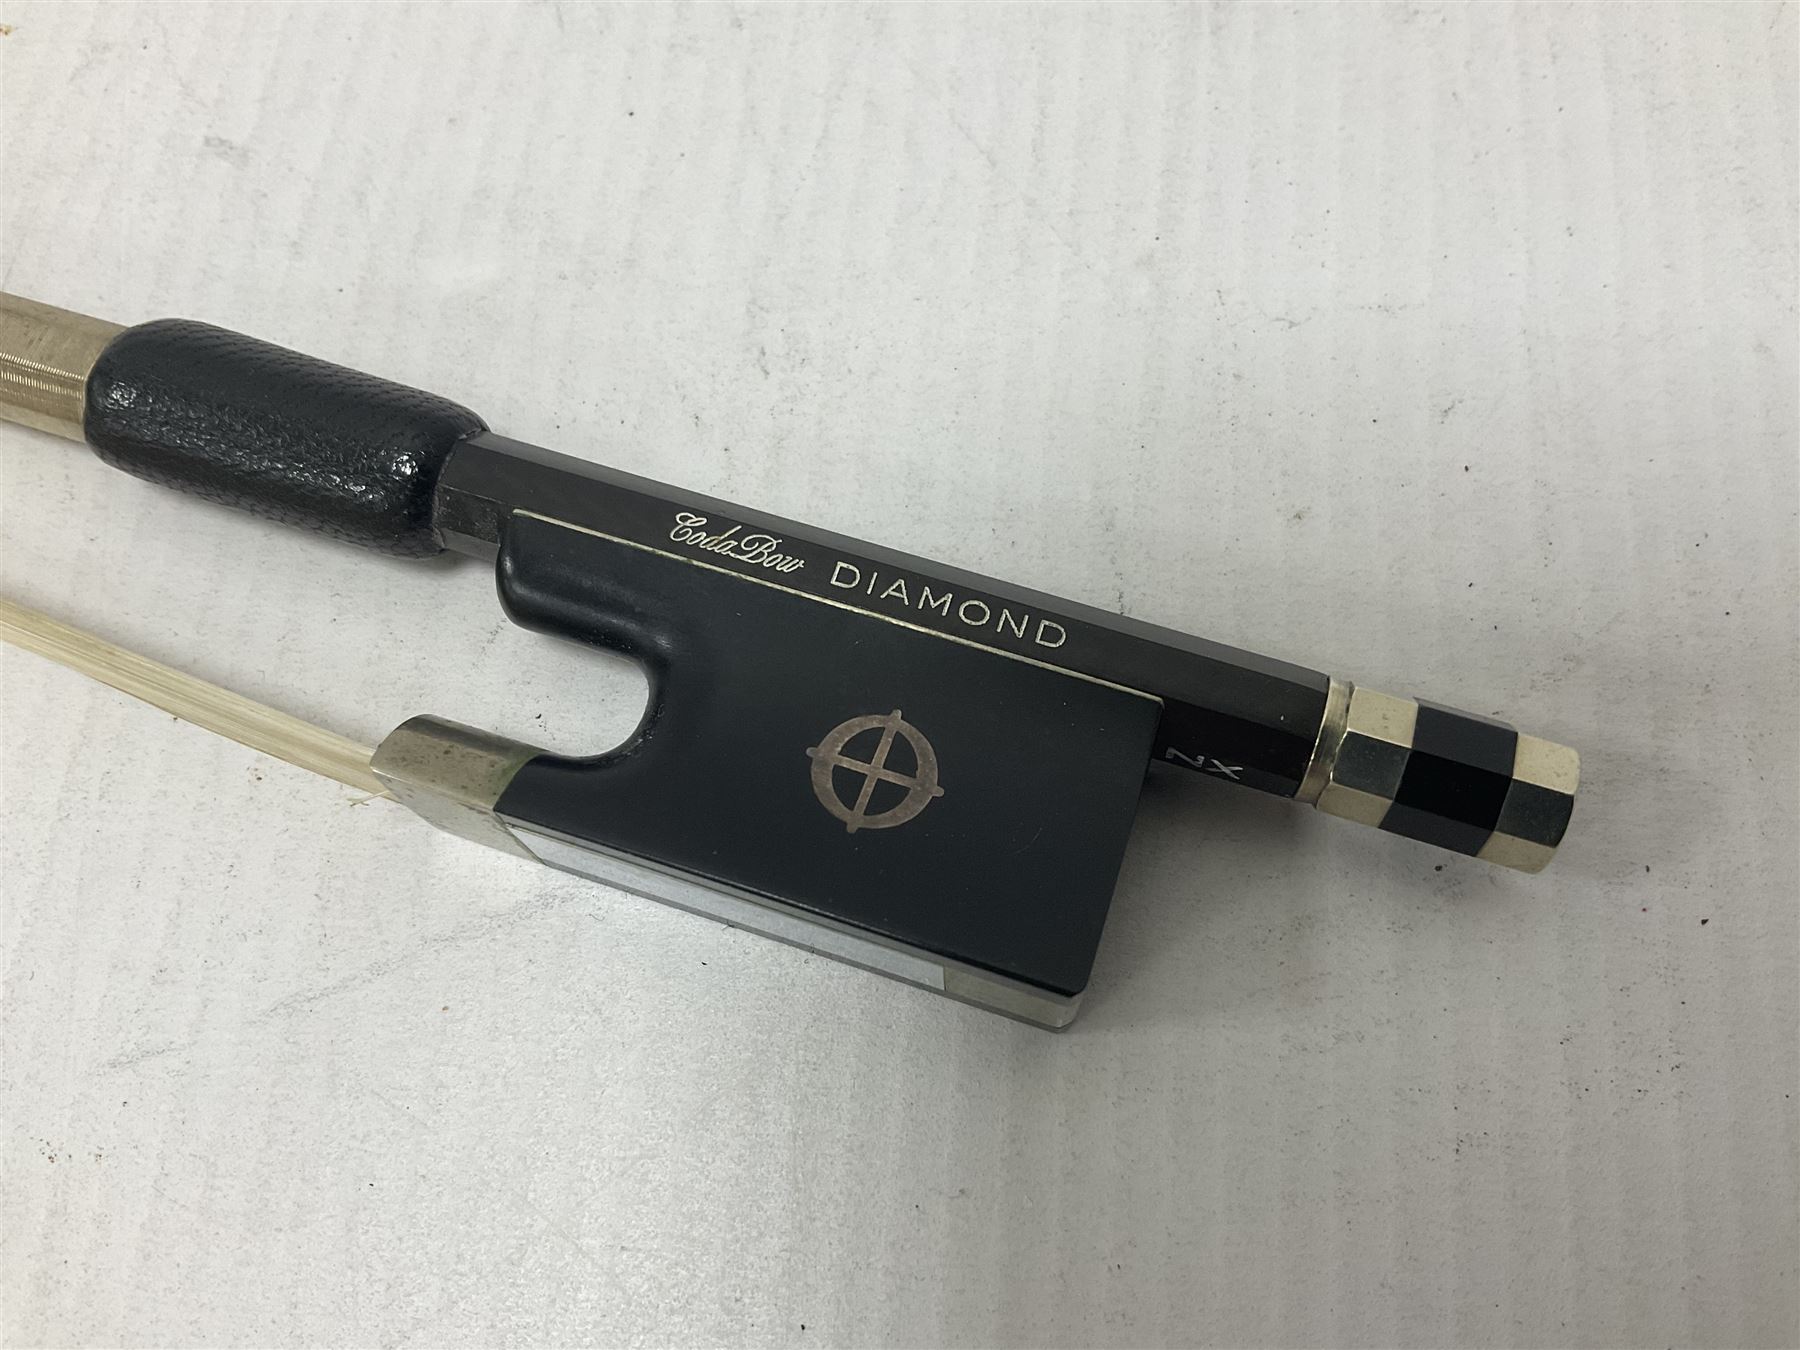 CodaBow Diamond carbon fibre violin bow with Nickel plated fittings - Image 3 of 13